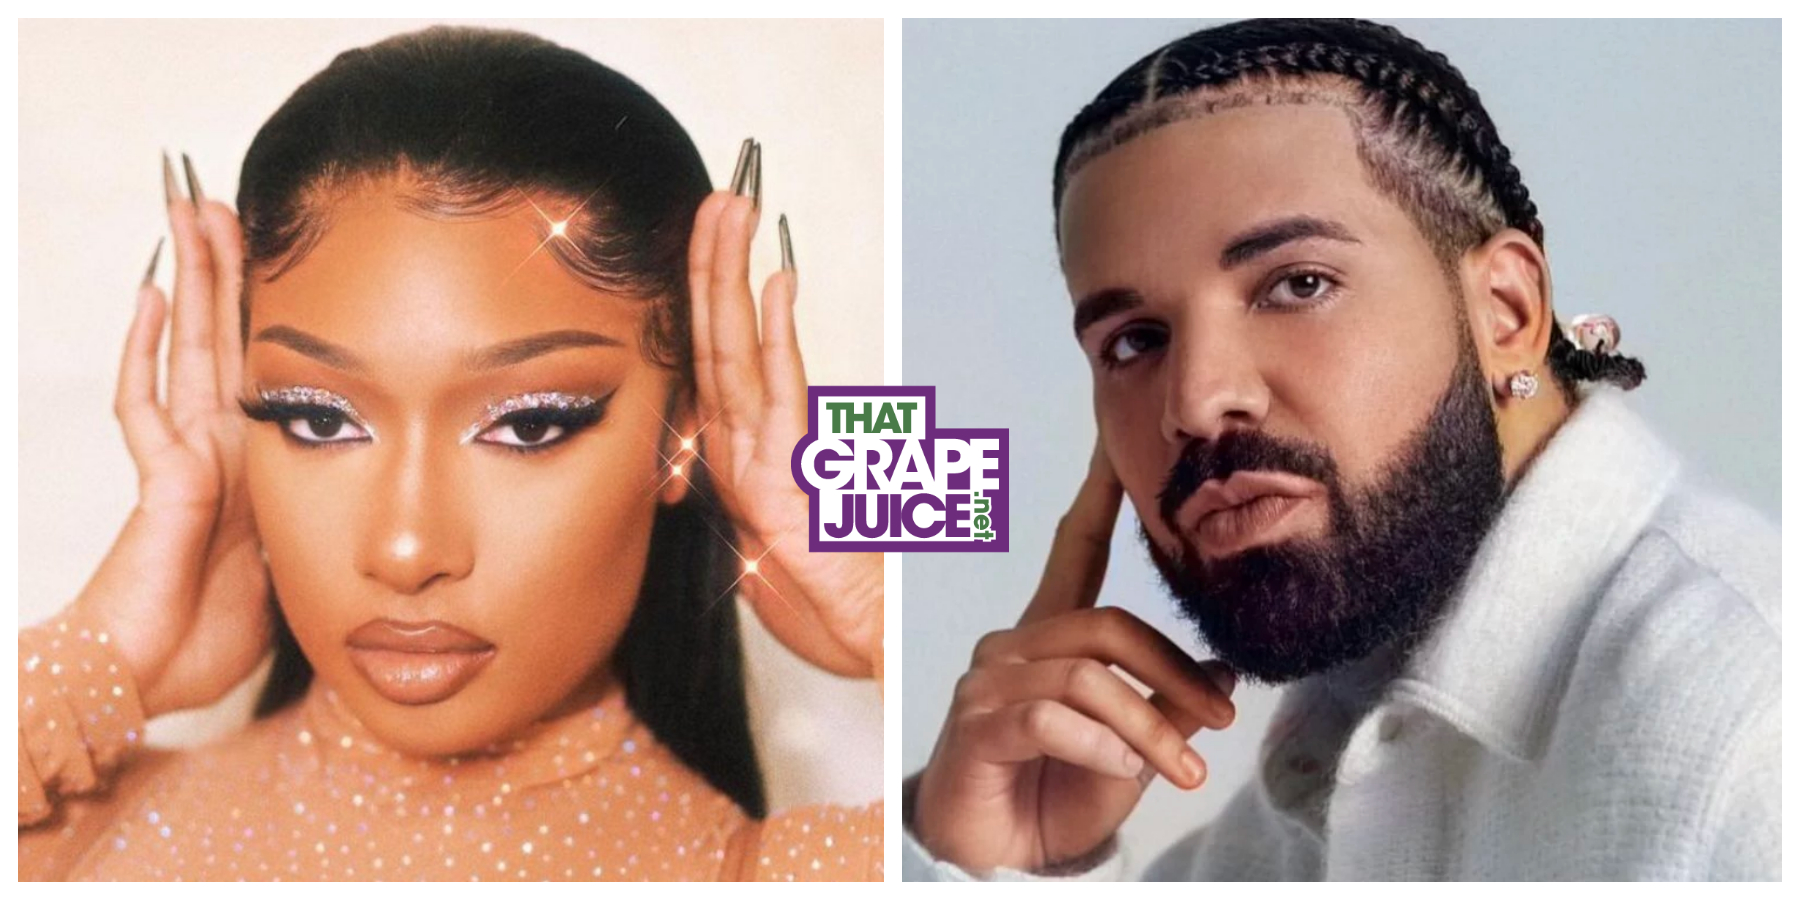 ‘Her Loss’: Megan Thee Stallion Hits Back at Perceived Drake Diss For “Lying About Getting Shot”